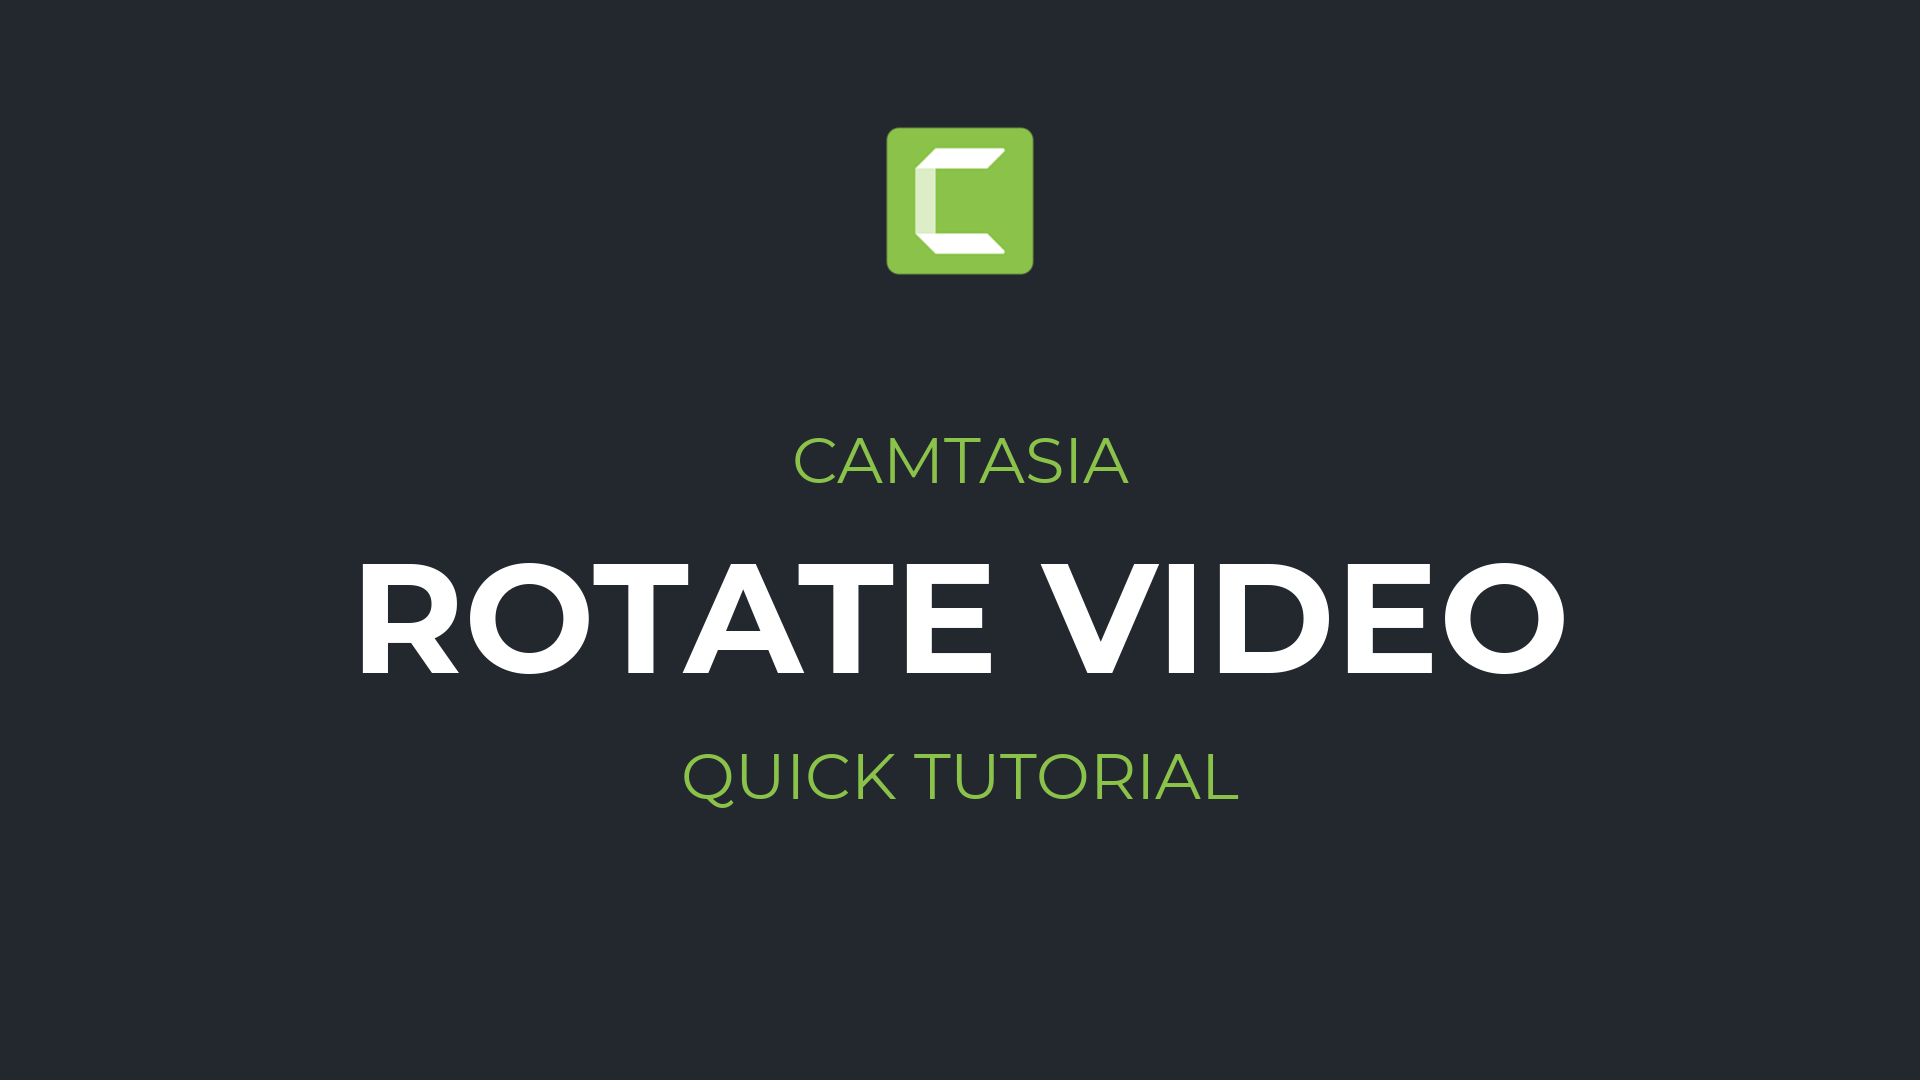 How to rotate a video in Camtasia | Camtasia Quick Tutorial for Beginners